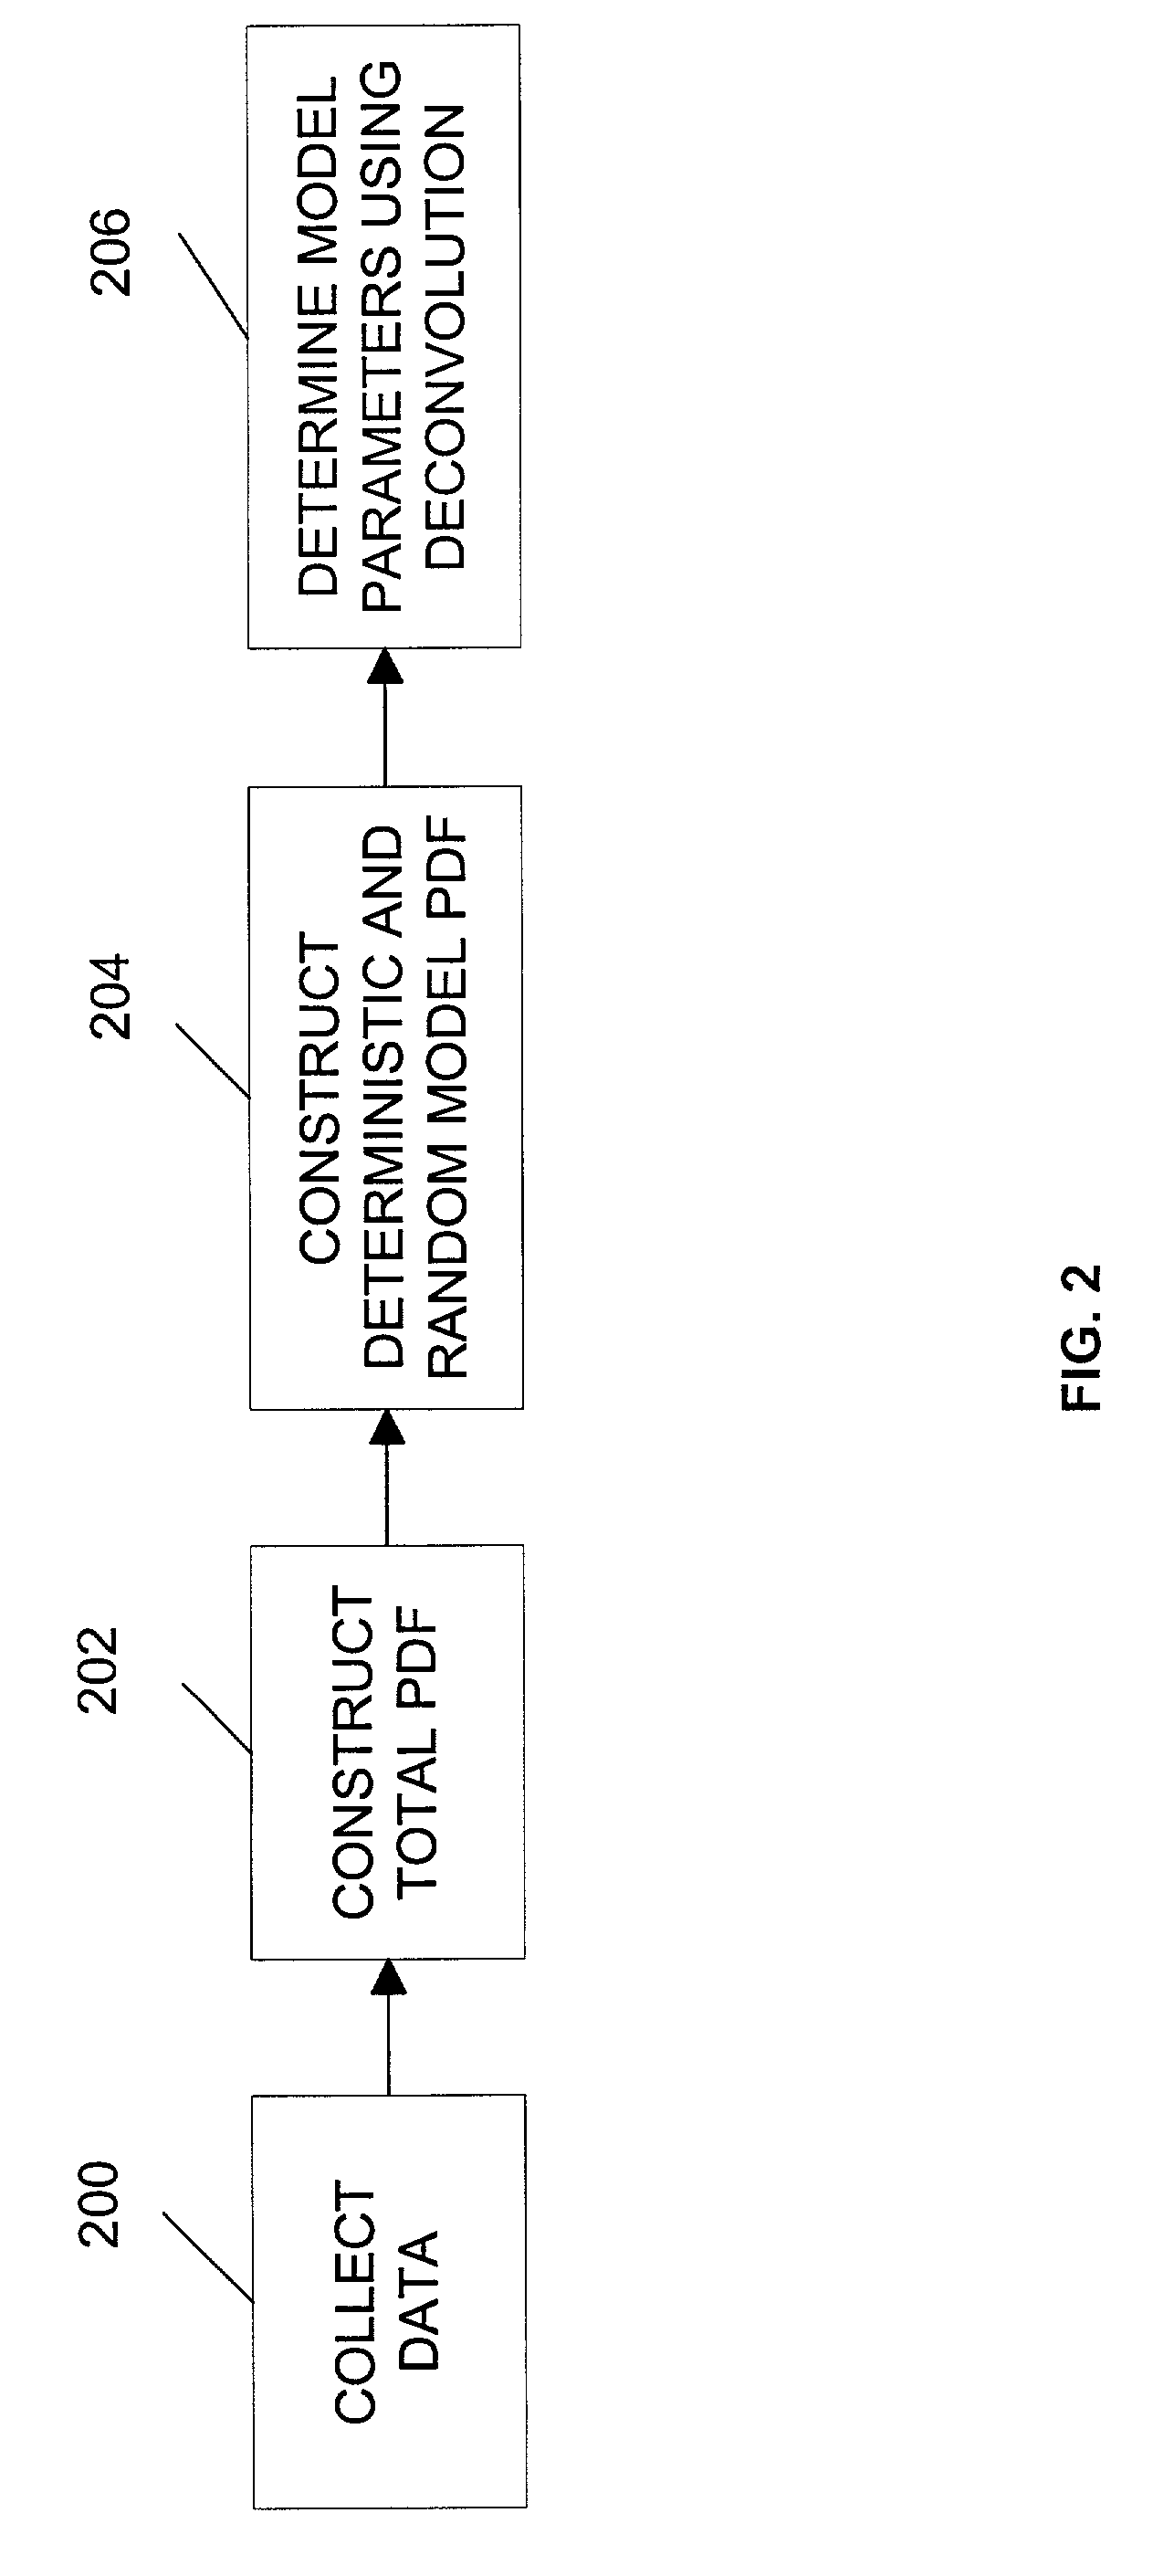 Method and apparatus for analyzing a distribution